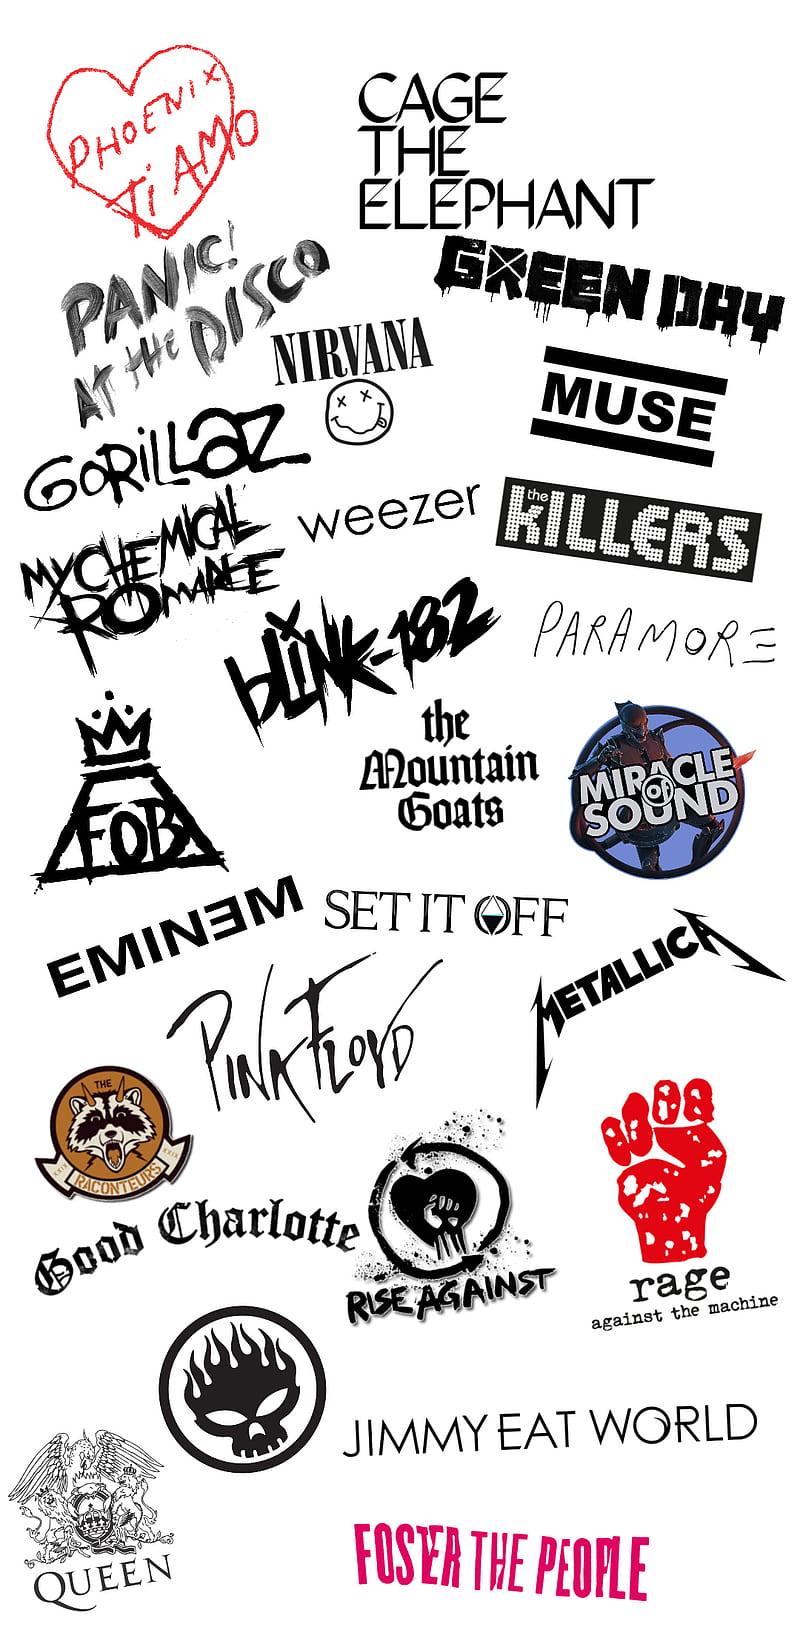 A collage of band logos including Queen, Blink 182, and My Chemical Romance. - Punk